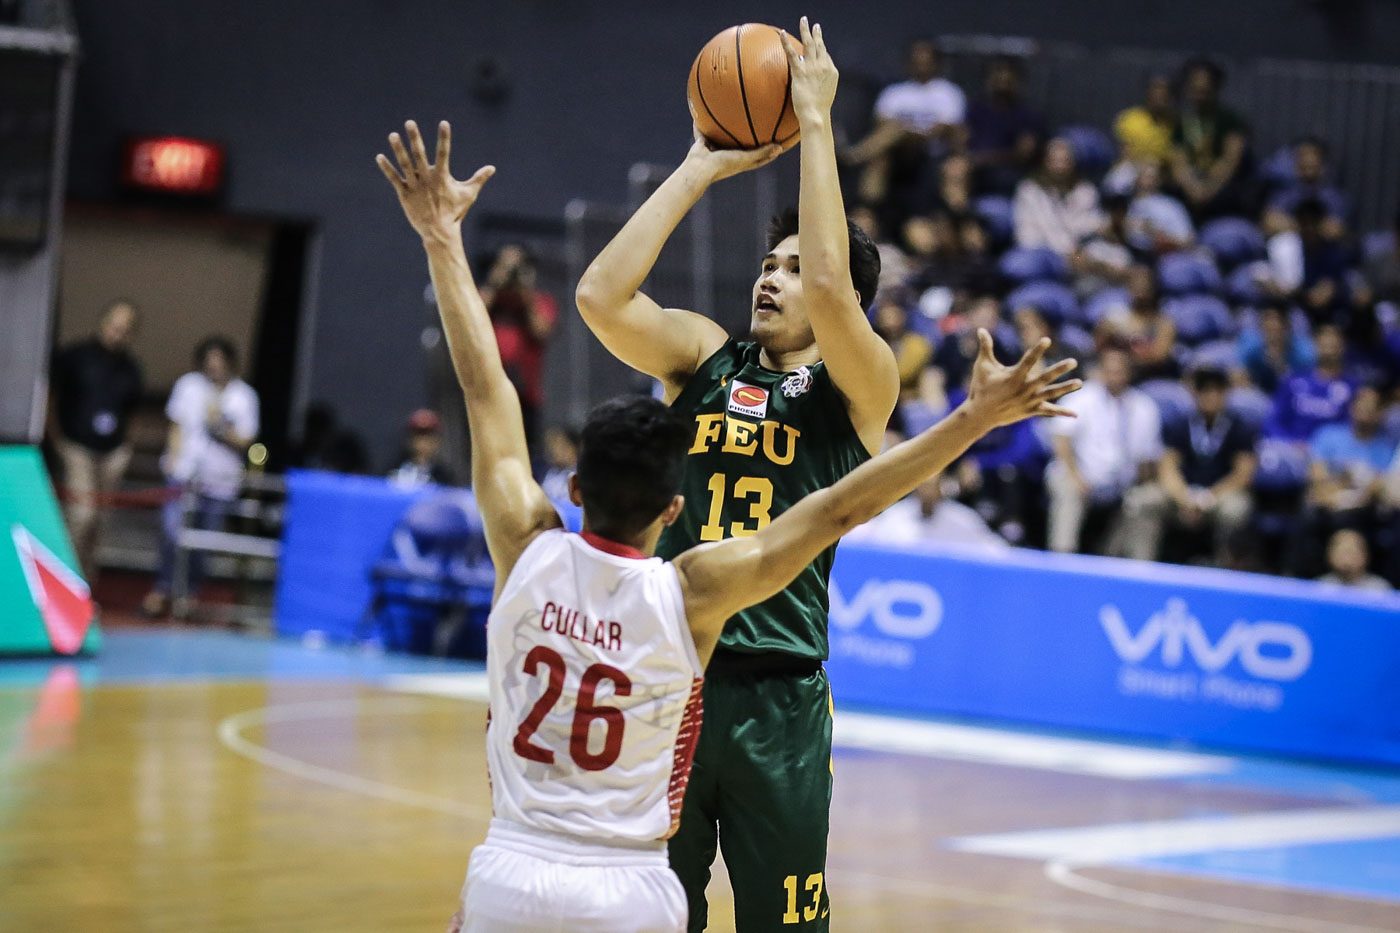 Arvin Tolentino is earning Coach Racela’s trust at FEU